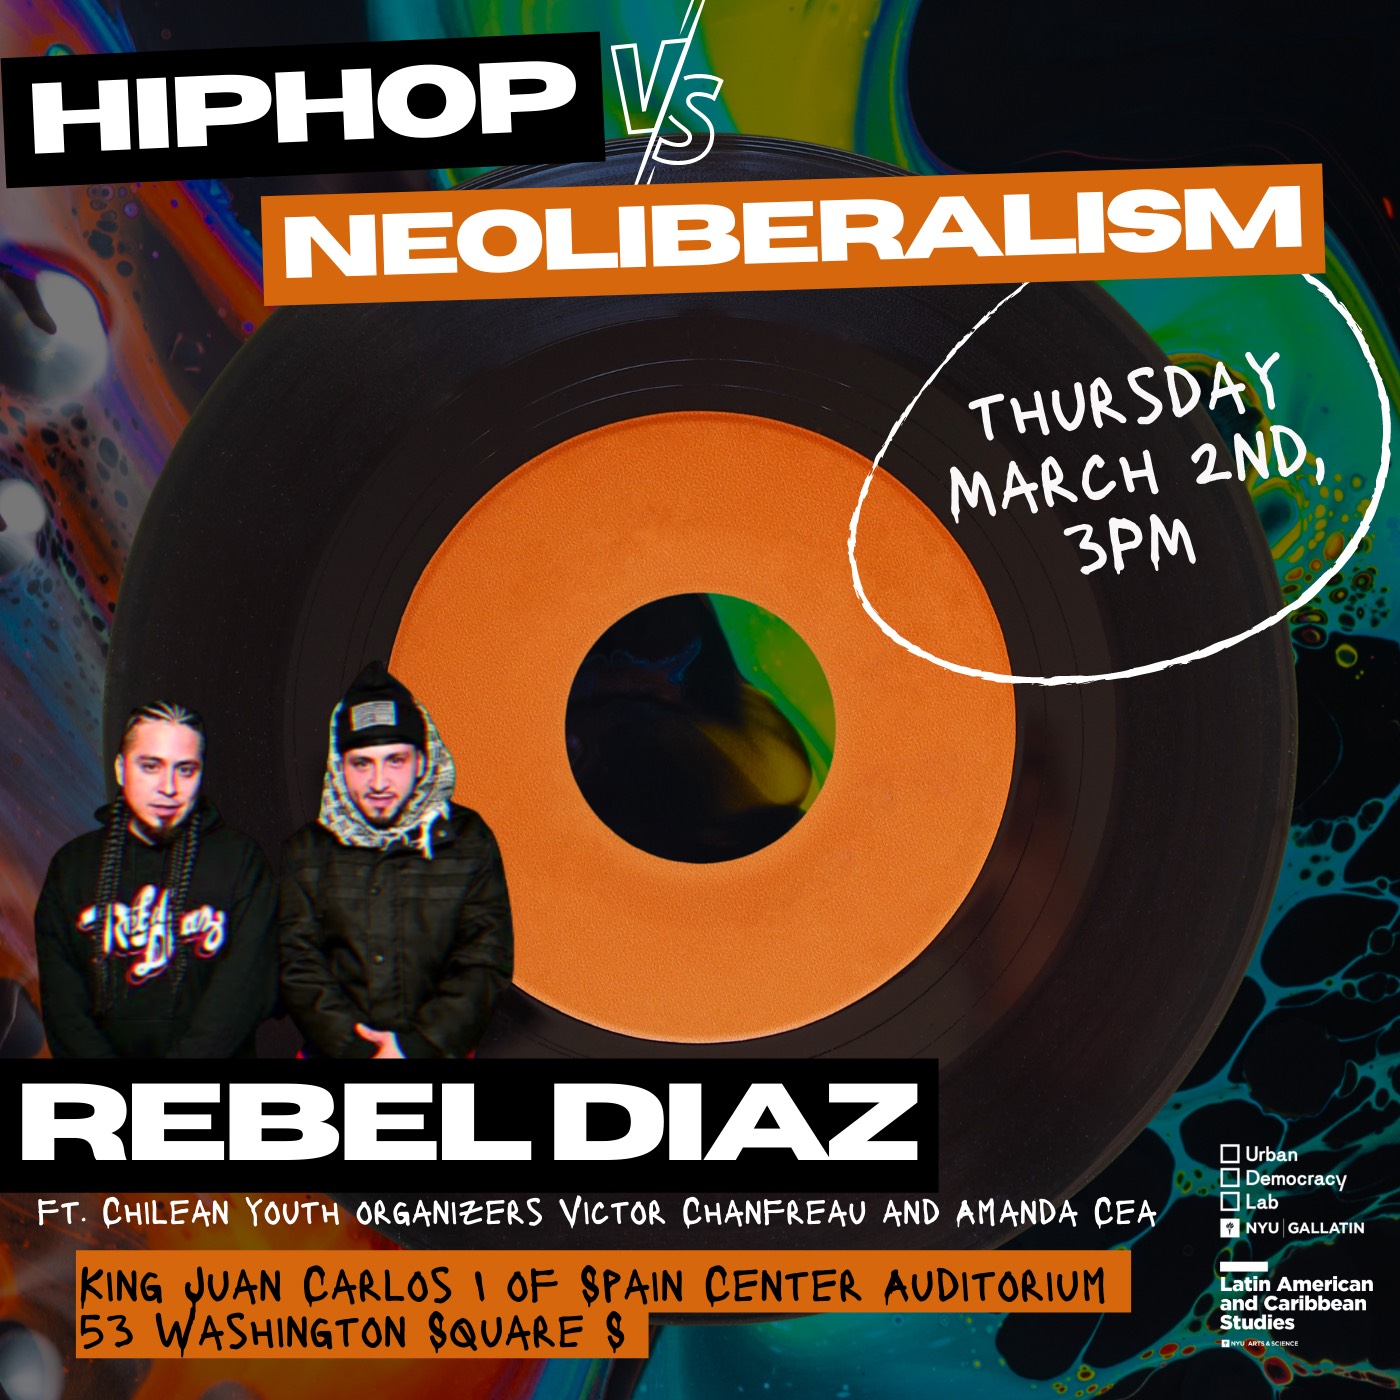 Hip hop vs. Neoliberalism workshop with Rebel Diaz on March 2nd at 3pm